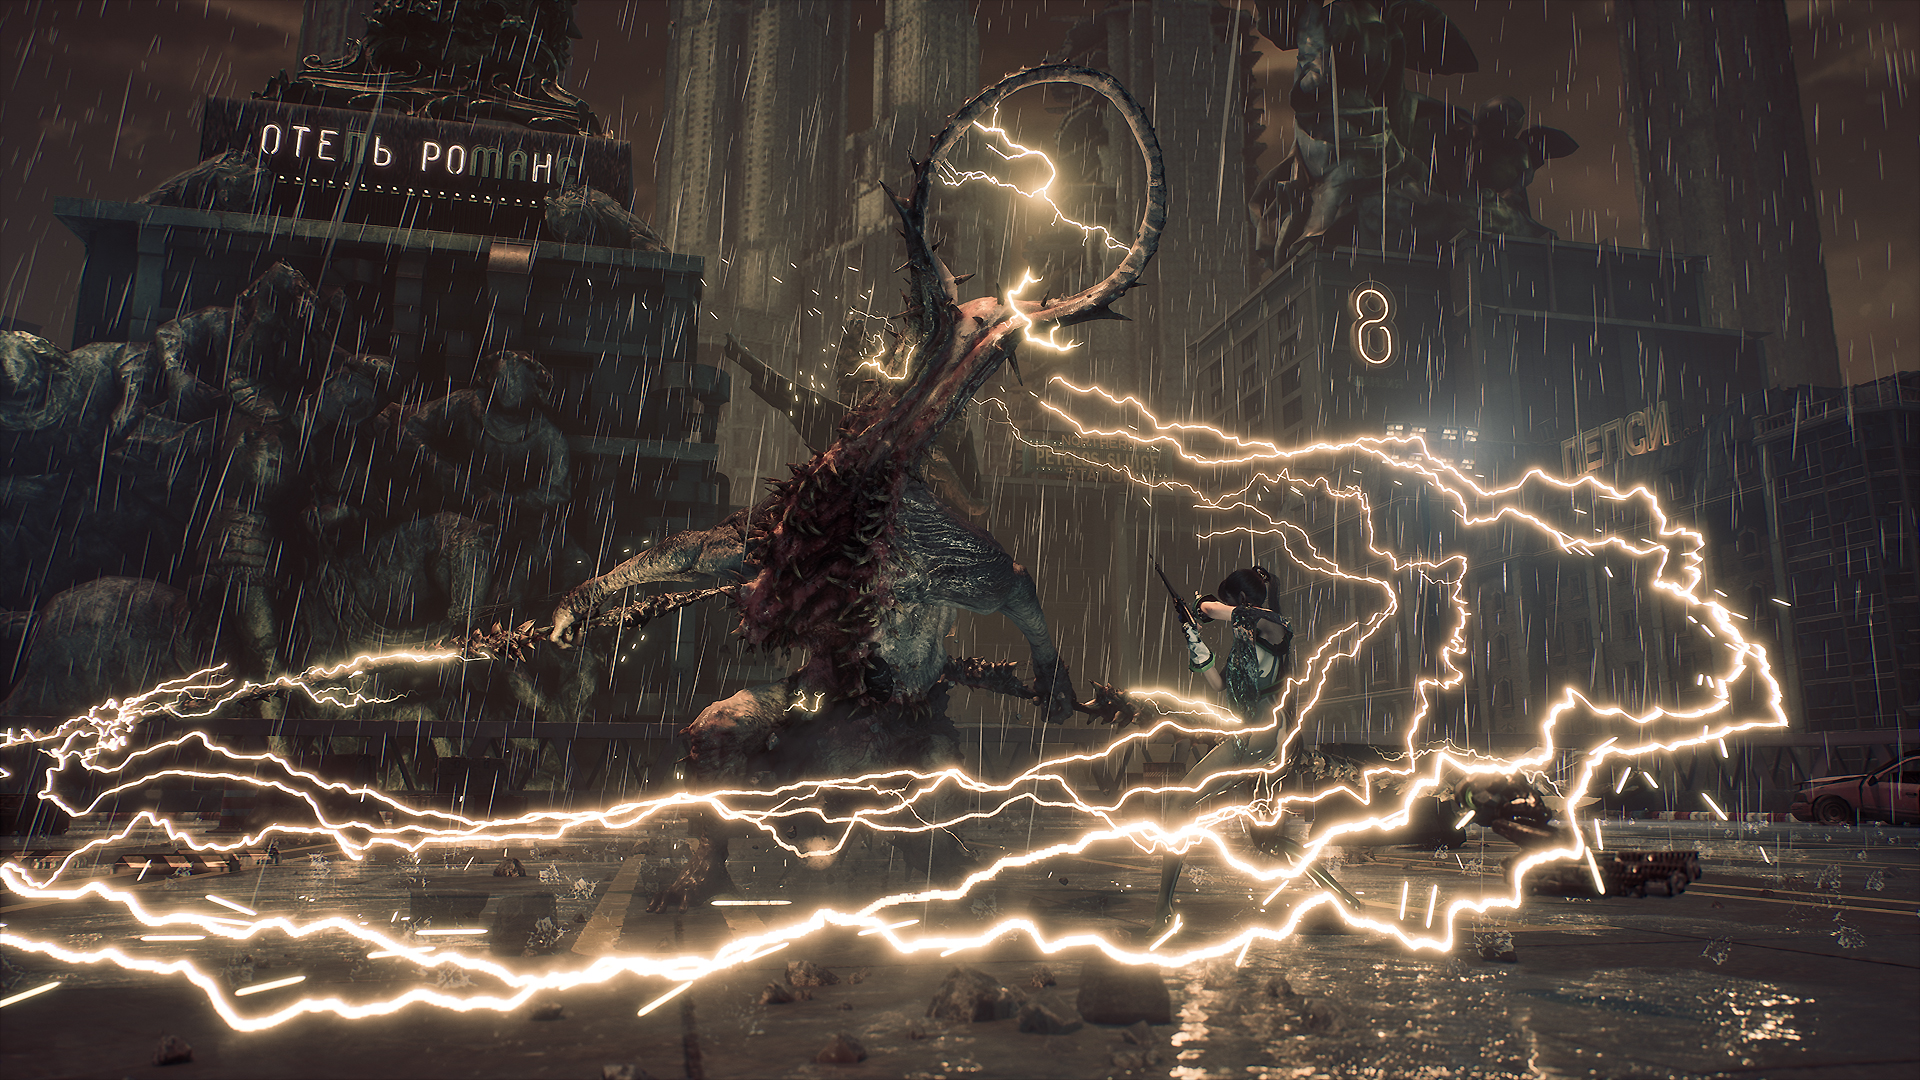  "In rain-lashed city streets, Eve faces off against a Naytibas, a bright gold arc of lighting-like energy forming in the arc of the swing of her enemy’s weapon. "